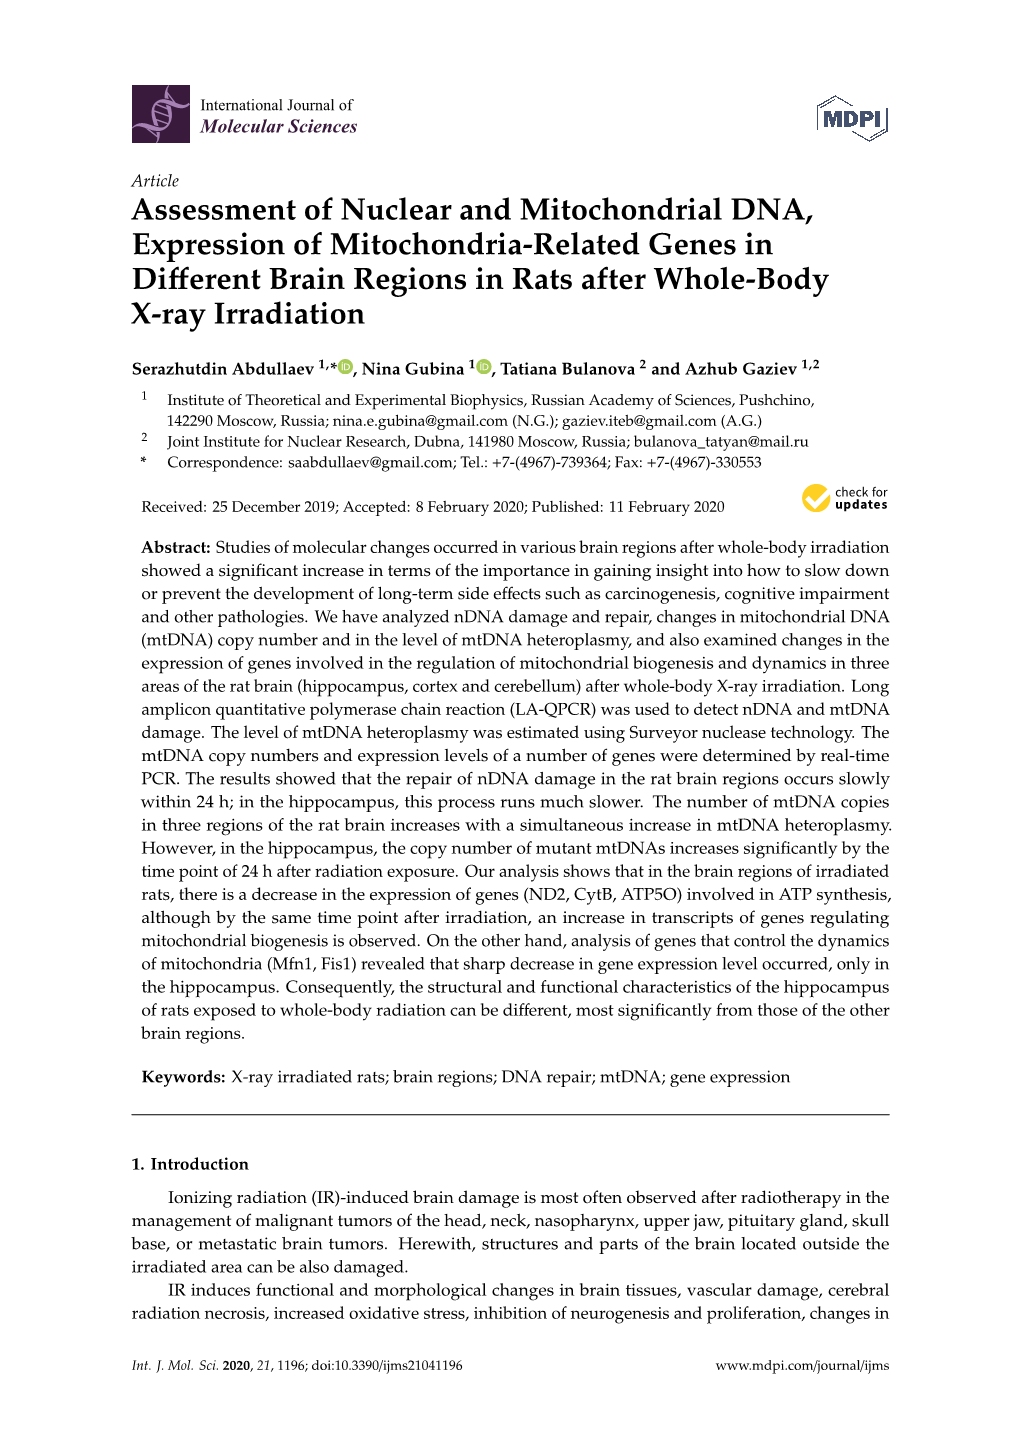 Assessment of Nuclear and Mitochondrial DNA, Expression of Mitochondria-Related Genes in Diﬀerent Brain Regions in Rats After Whole-Body X-Ray Irradiation